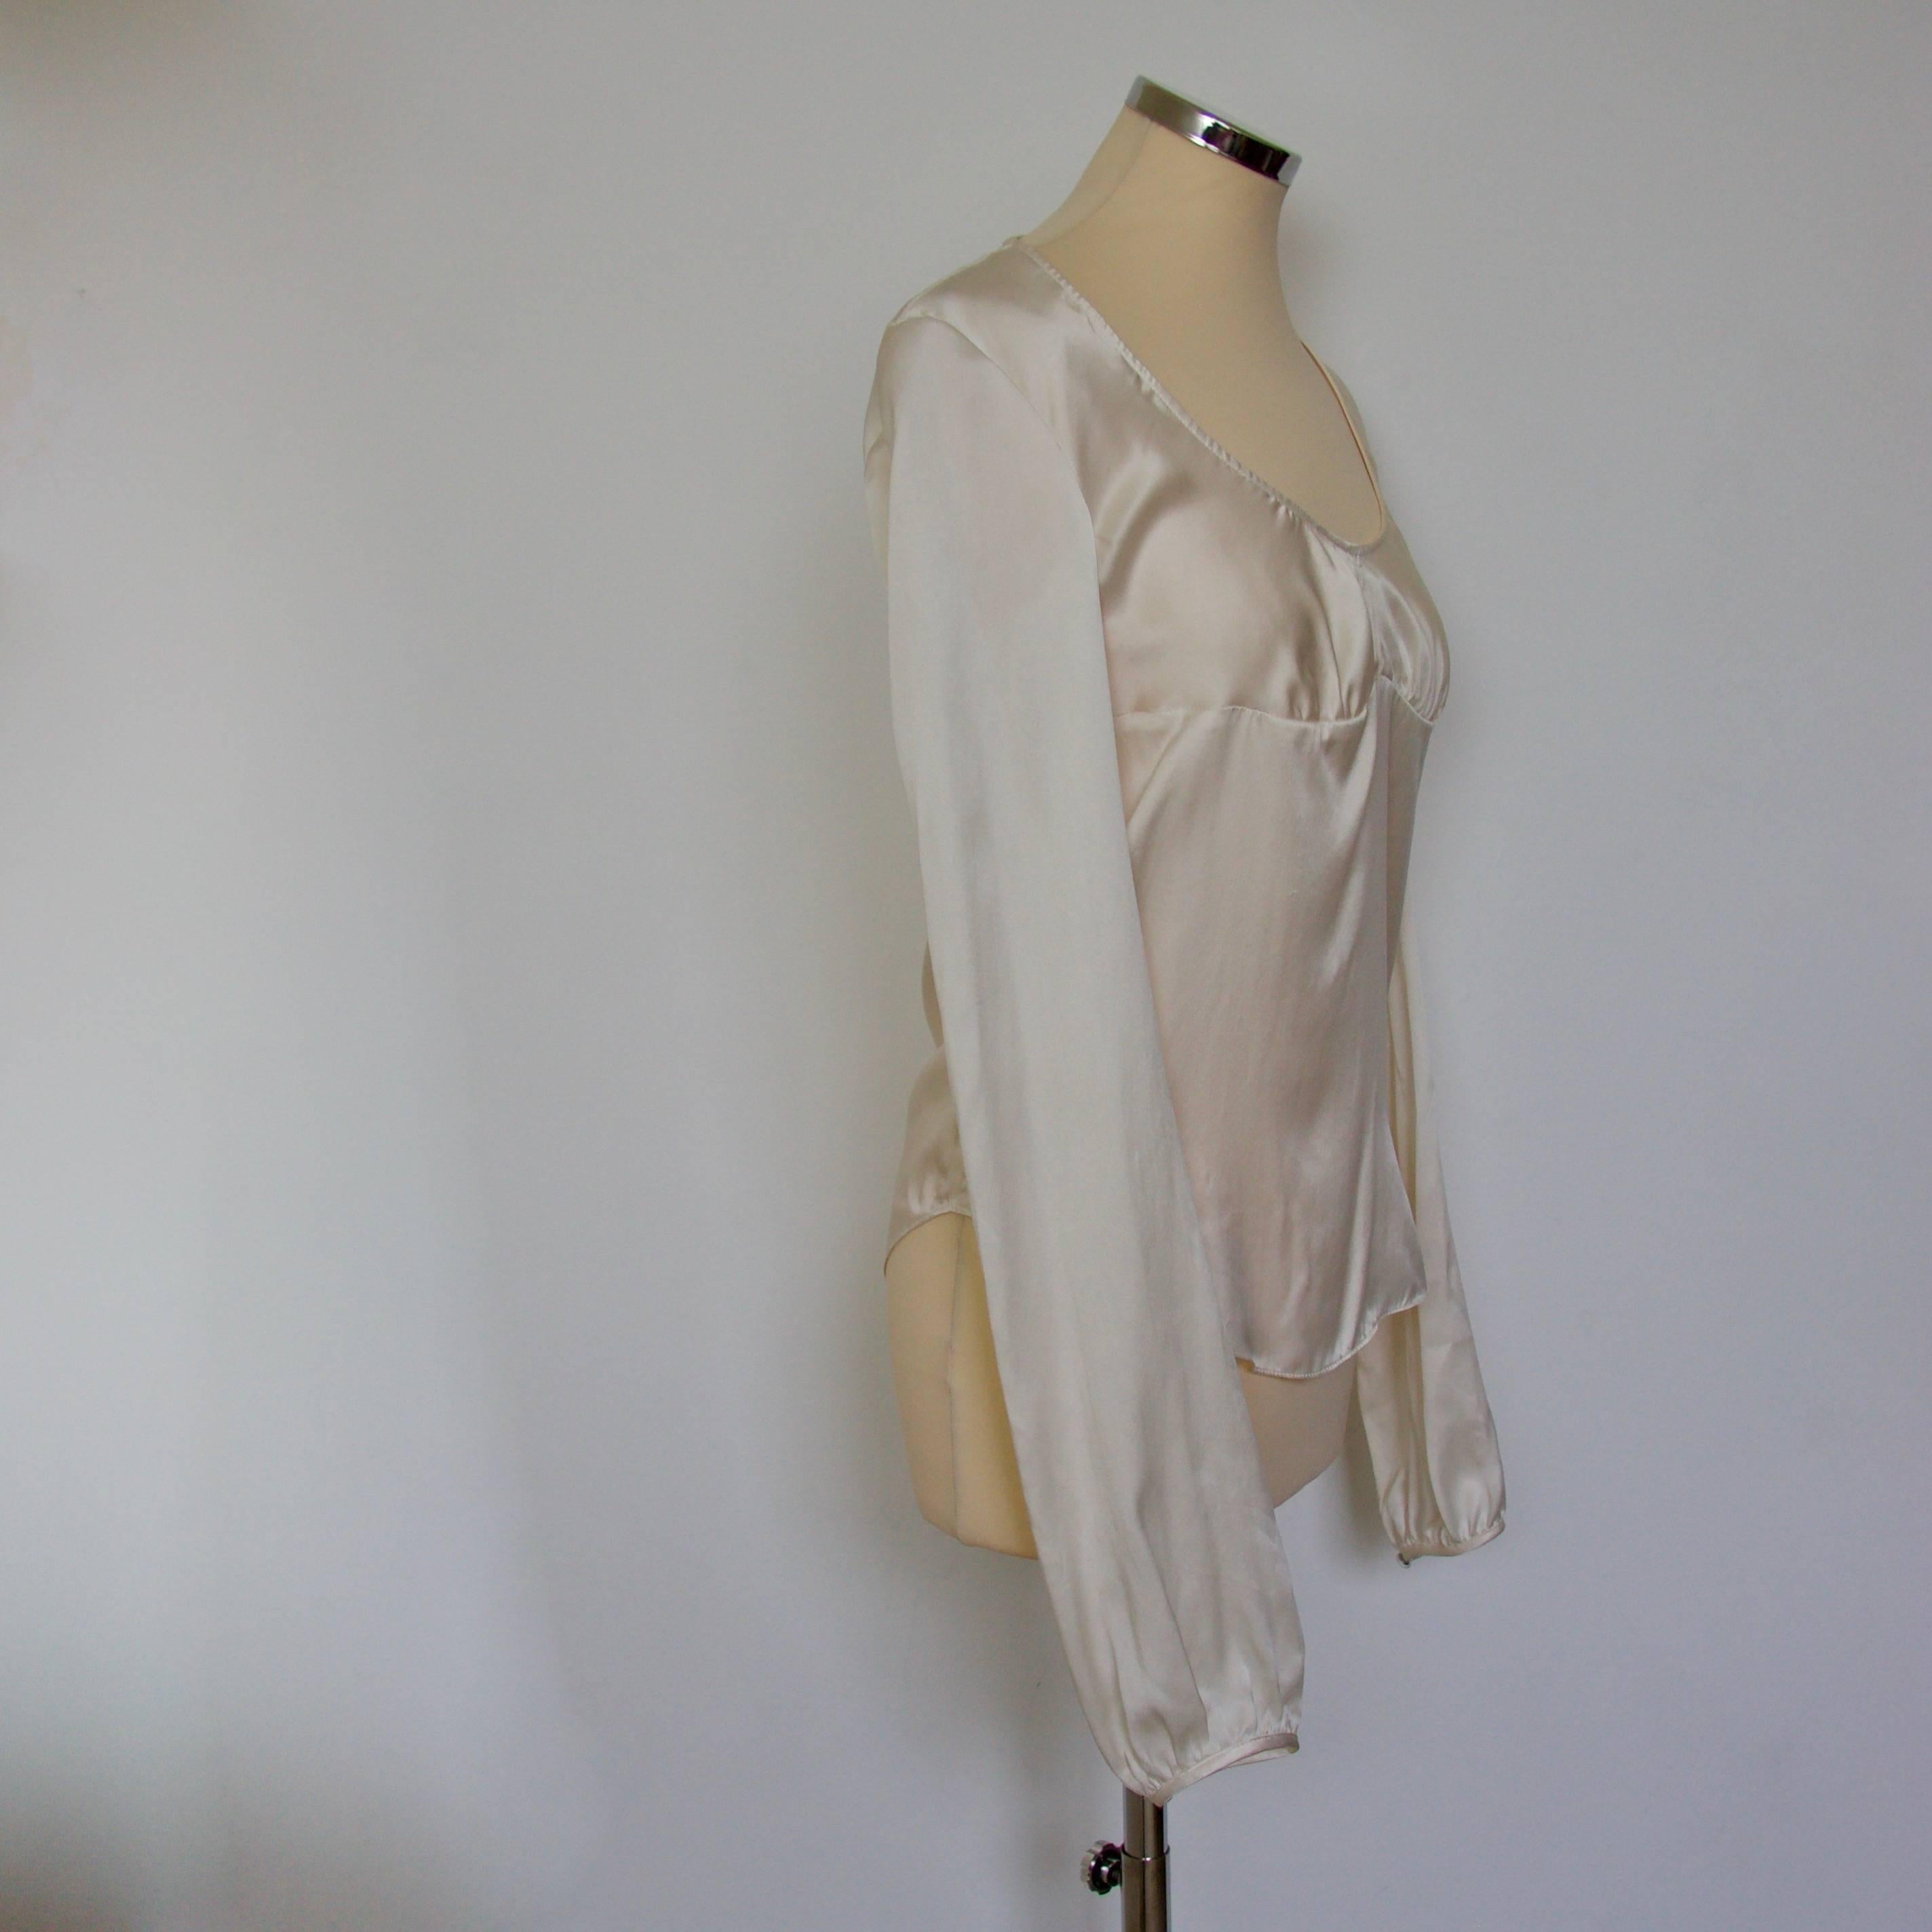 Silk long sleeved blouse, v neck with concealed zip opening.
Cream 
100% Silk
Made in Italy 
IT 38 (XXS)